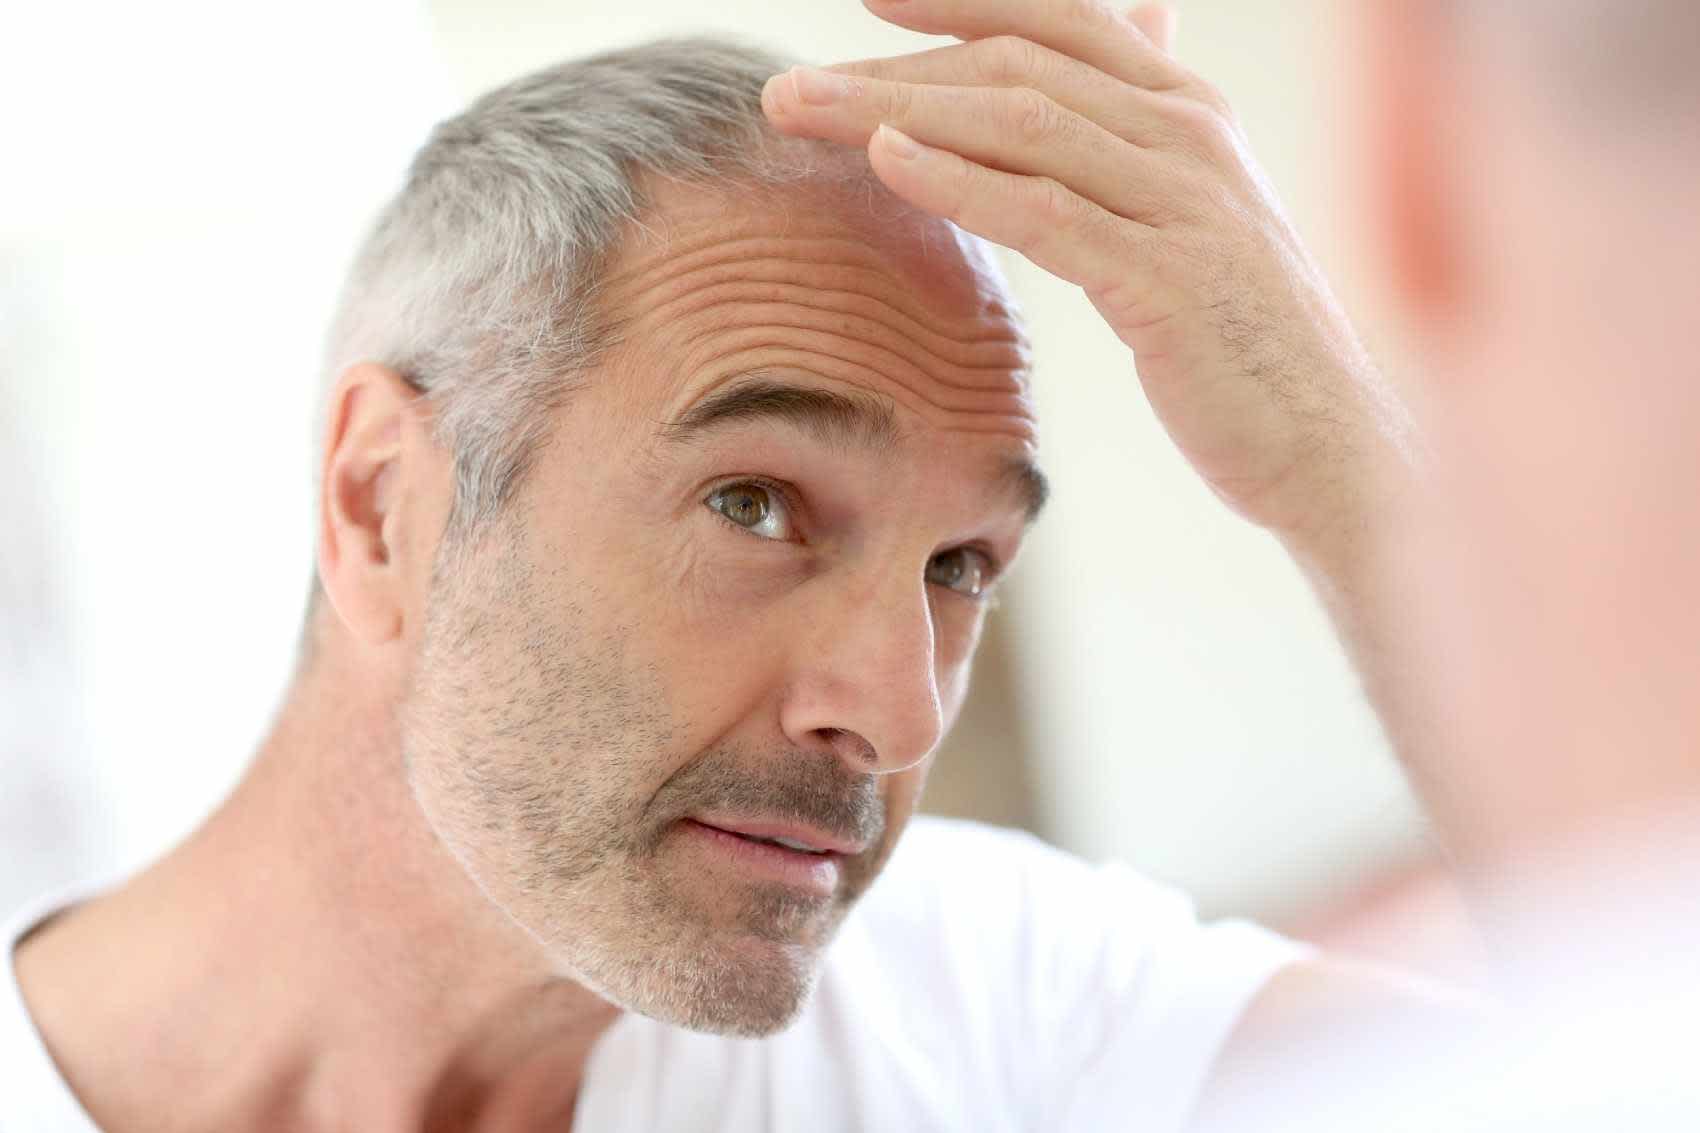 Man looking in mirror to check hair loss from syphilis infection